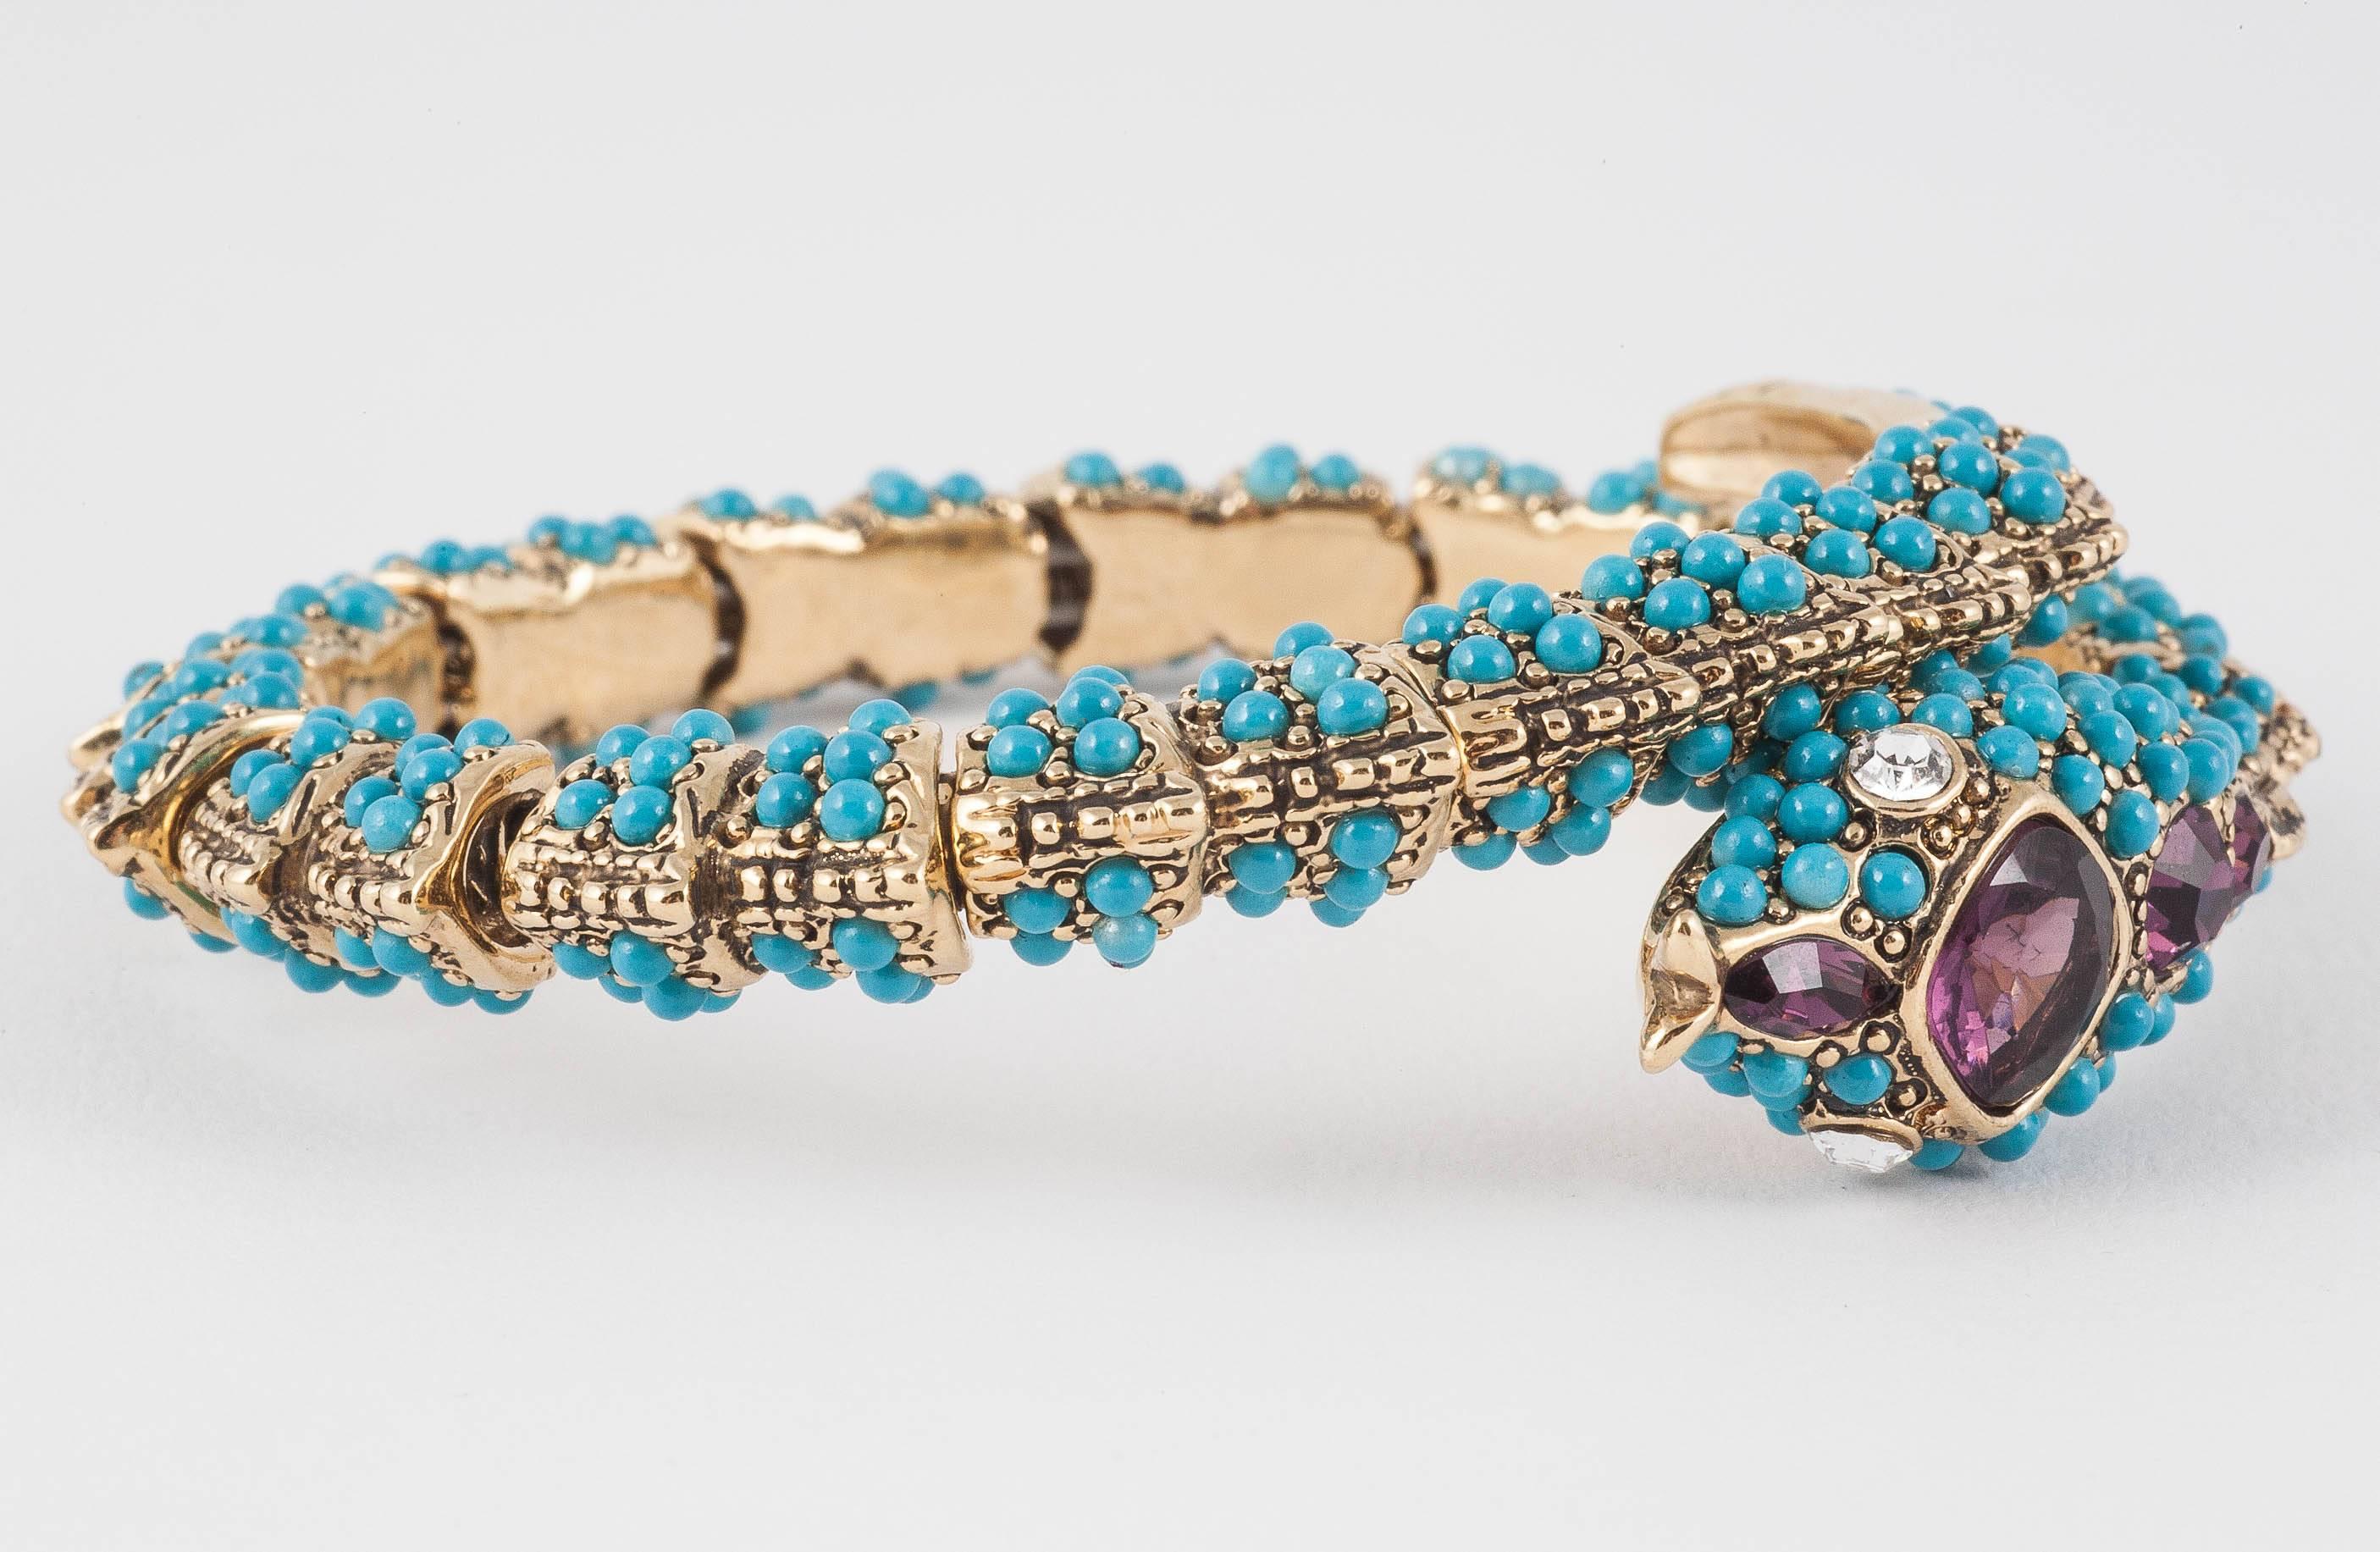 This lightly sprung and flexible 'KJL' (Kenneth Jay Lane) 'snake' bangle/bracelet is delicately decorated with tiny turquoise cabuchons and amethyst paste decoration on the head of the serpent. Imitating exquisite Victorian and Georgian jewellery,